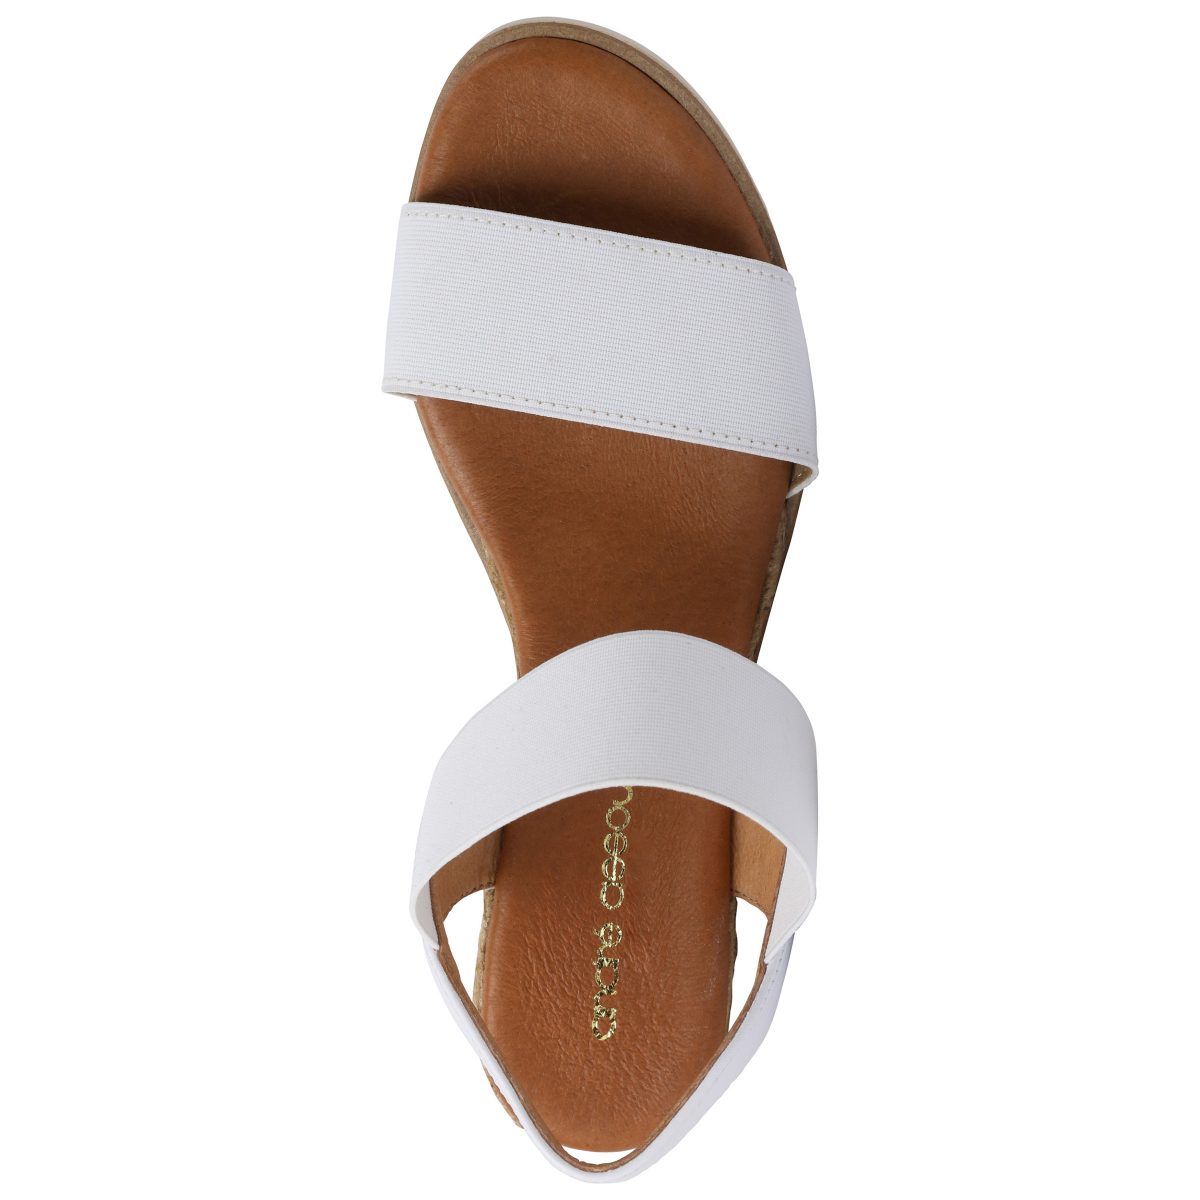 Andre Assous Neveah Sandal| Ooh Ooh Shoes woman's clothing and shoe boutique naples, charleston and mashpee